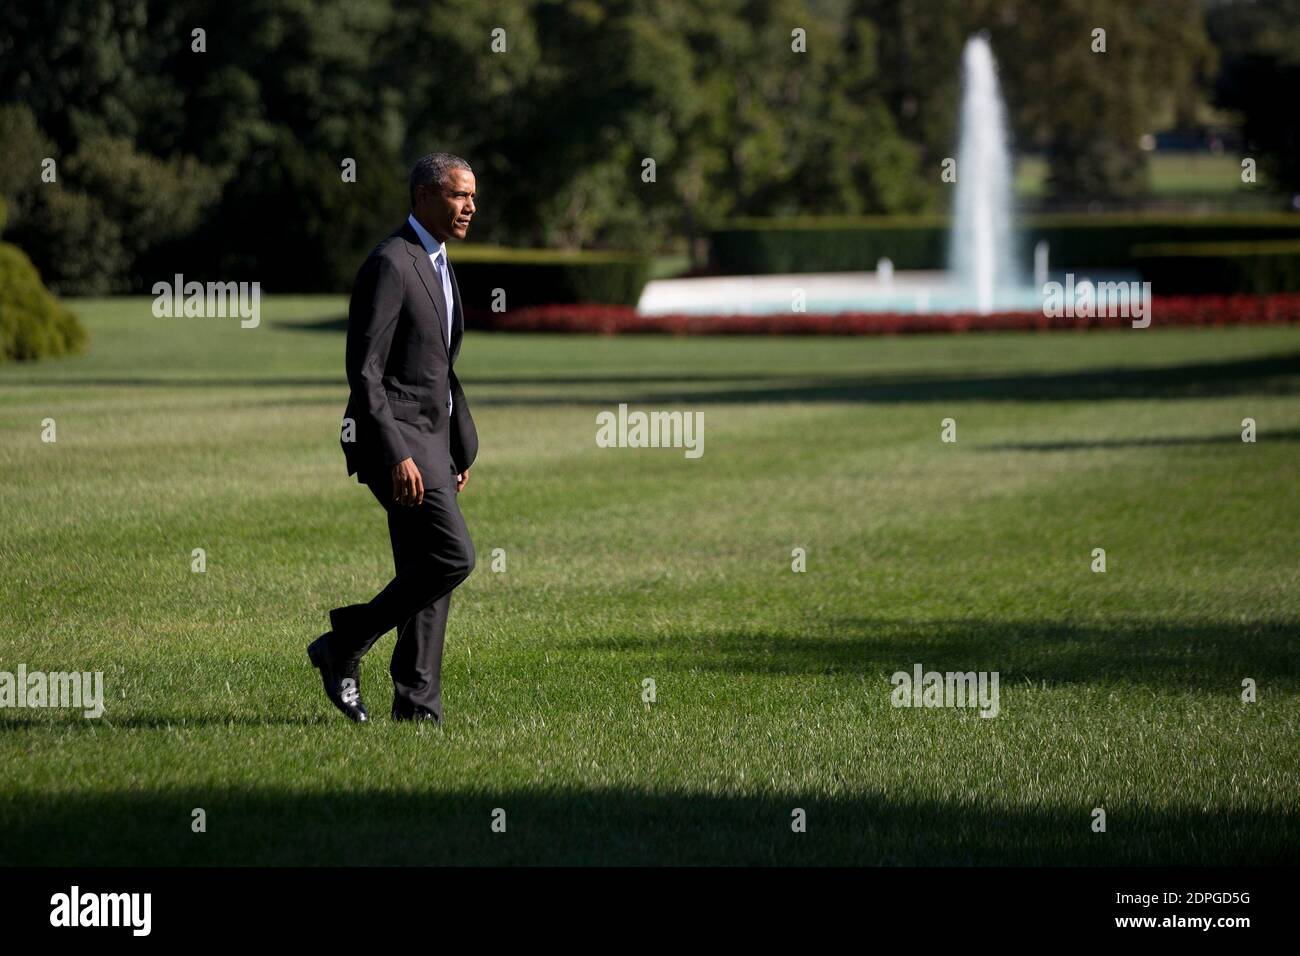 U.S. President Barack Obama walks toward the White House after landing on the South Lawn in Washington, DC, USA, on Tuesday, August 25. Obama pledged yesterday to provide incentives to support investments in renewable energy, saying the industry will thrive despite opposition by Republicans and fossil-fuel suppliers. Photo by Andrew Harrer/Pool/ABACAPRESS.COM Stock Photo